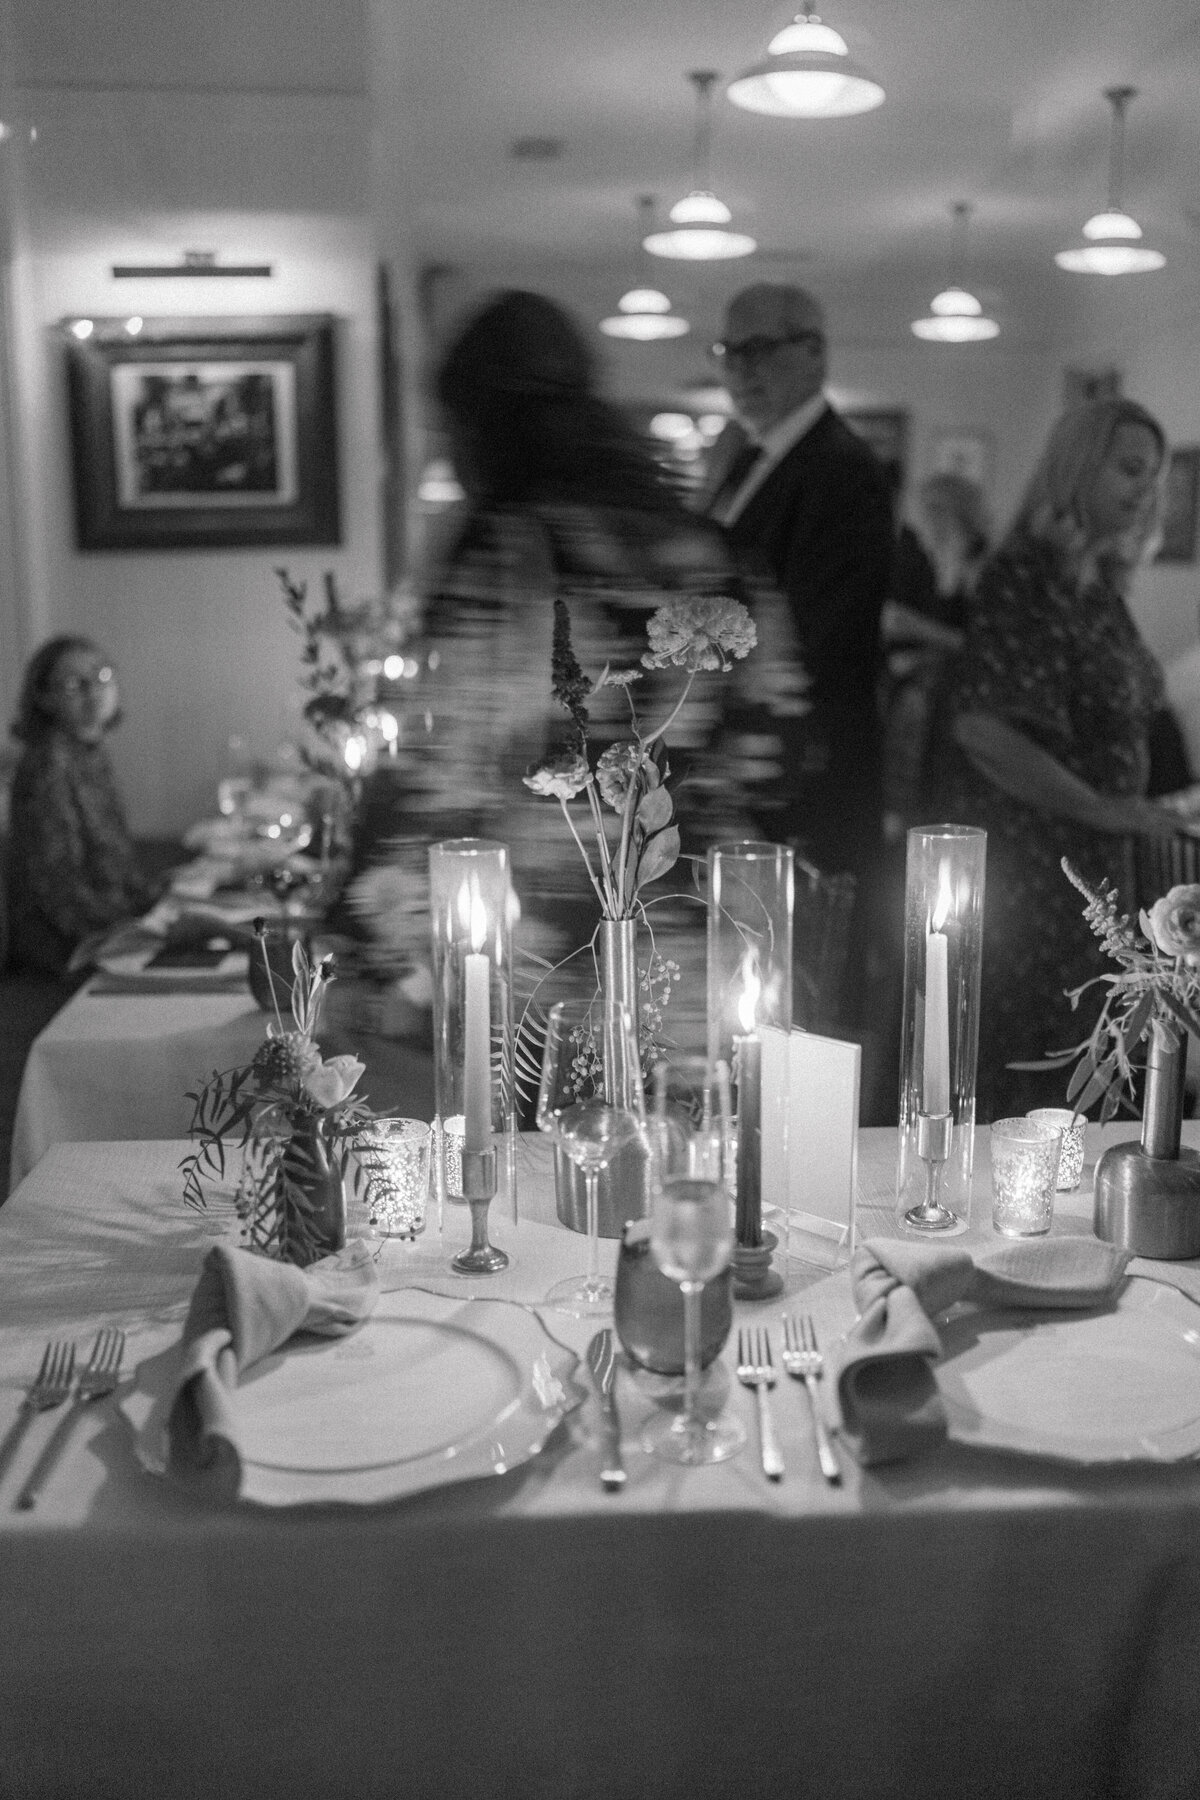 Guests find their seats at intimate candlelight dinner at the Post House Inn. Black and white wedding photos. Kailee DiMeglio Photography.